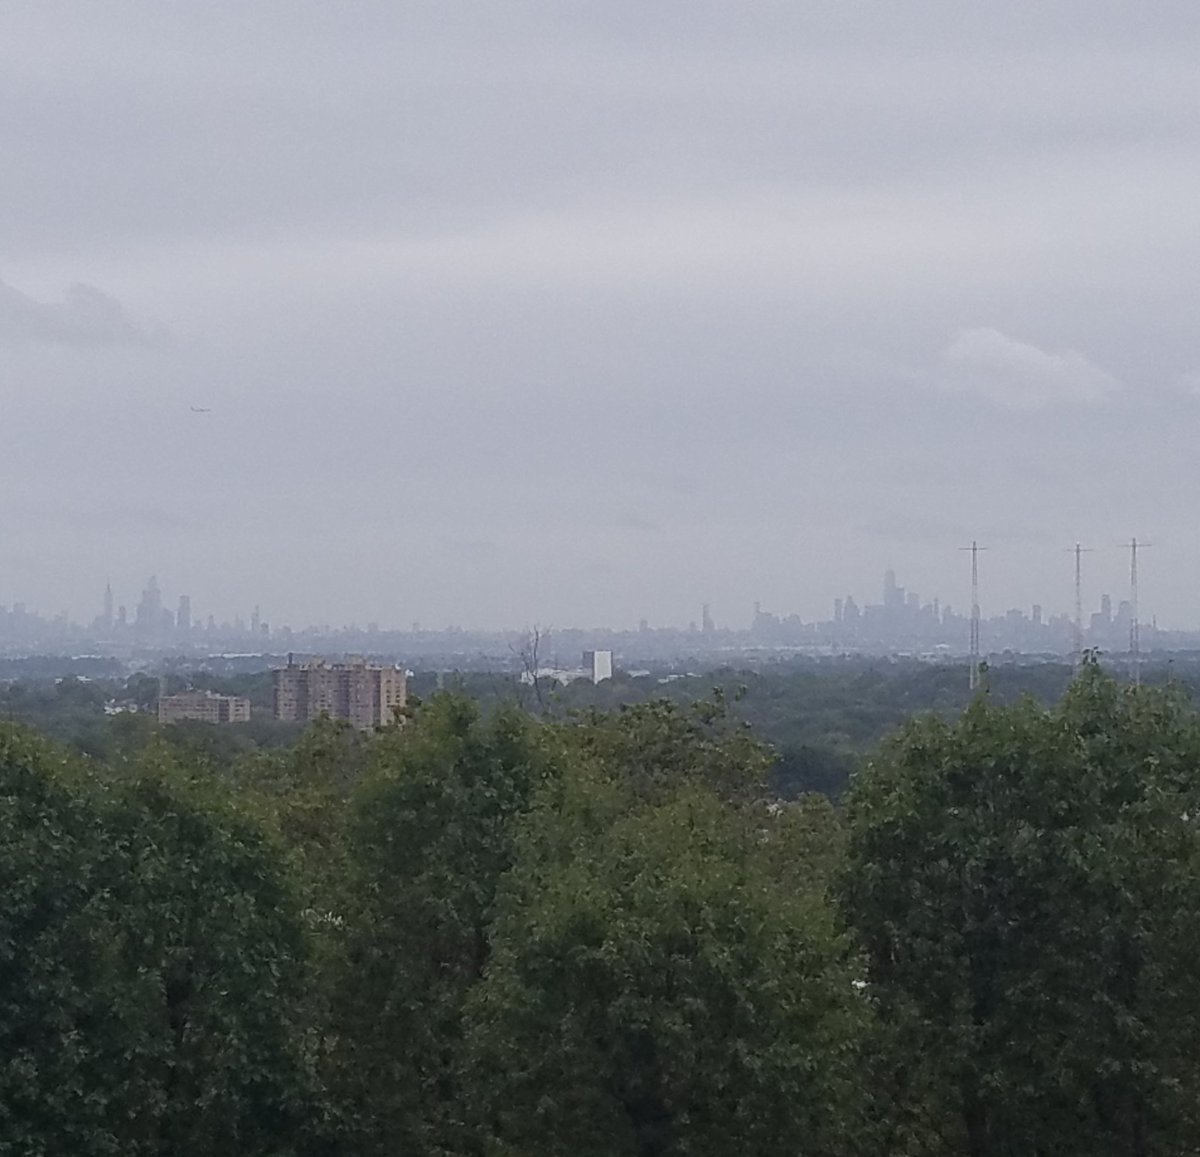 Too bad it's a cloudy day, but still a nice view of the city is a plus! #HelloNYC #ElisesCollegeWorldTour #MontclairStateUniversity #FitzGirlsRule #SundayFitz